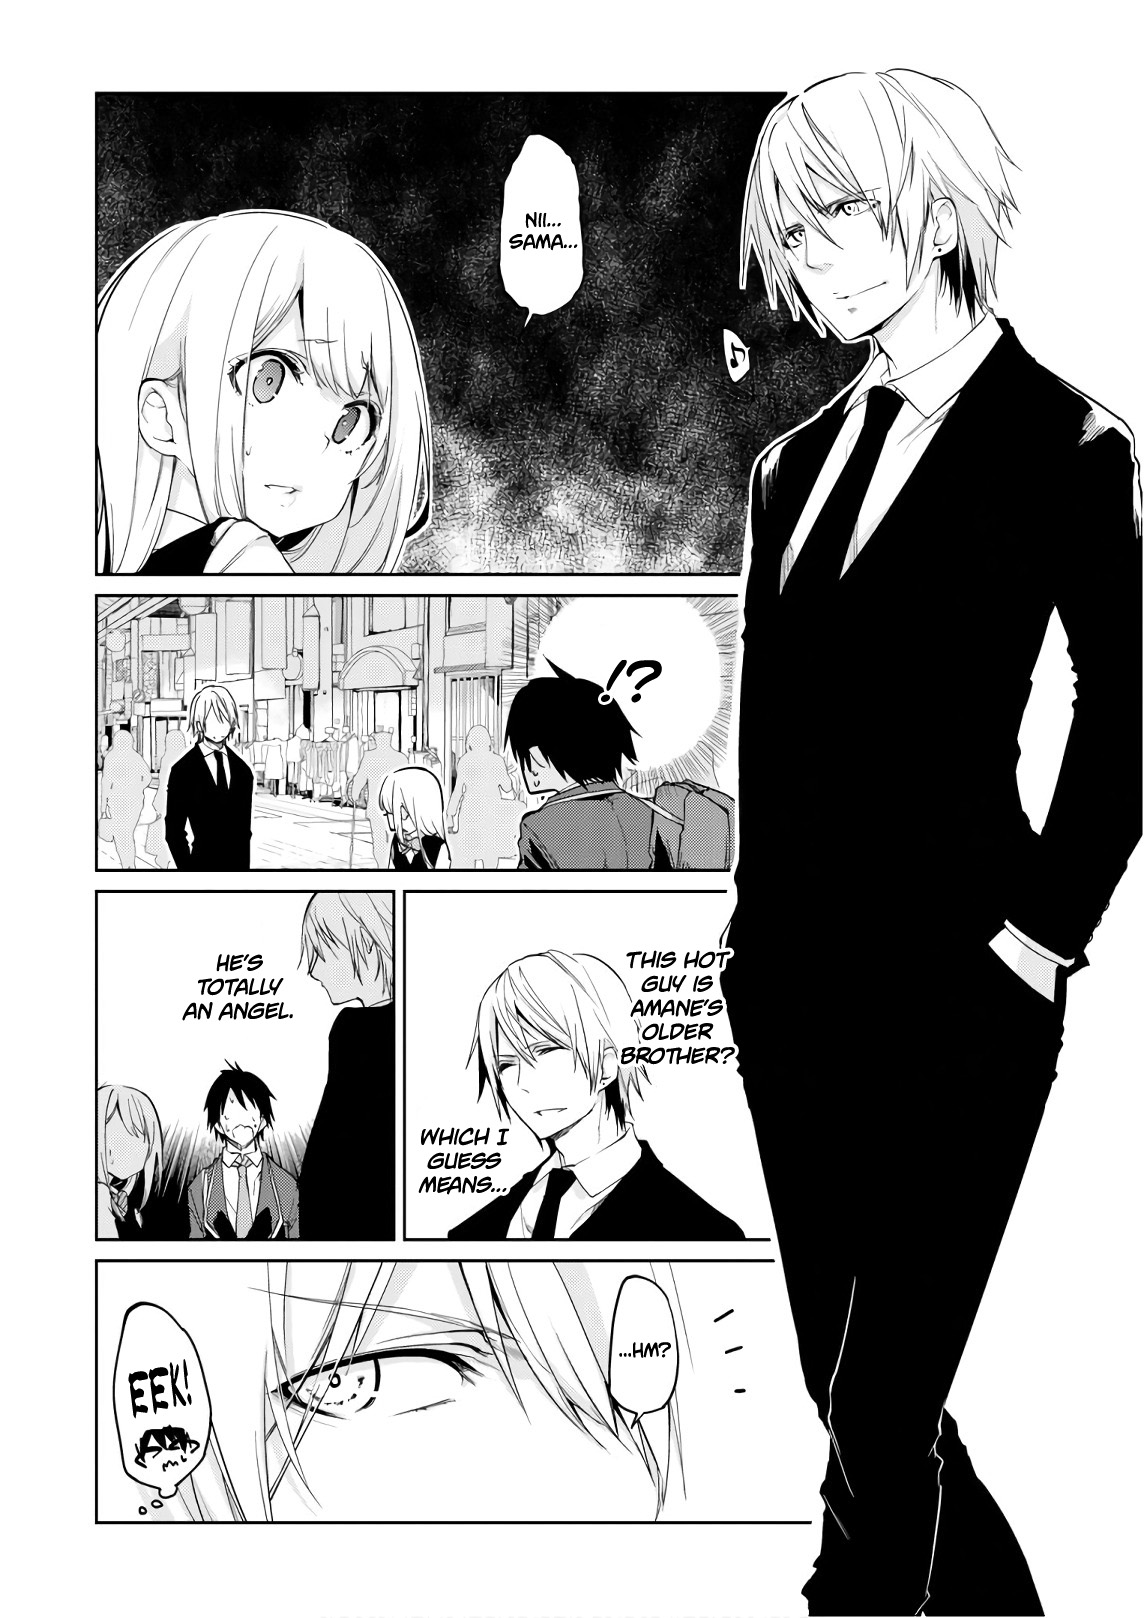 The Foolish Angel Dances With Demons Vol.6 Chapter 27: Brother - Picture 3